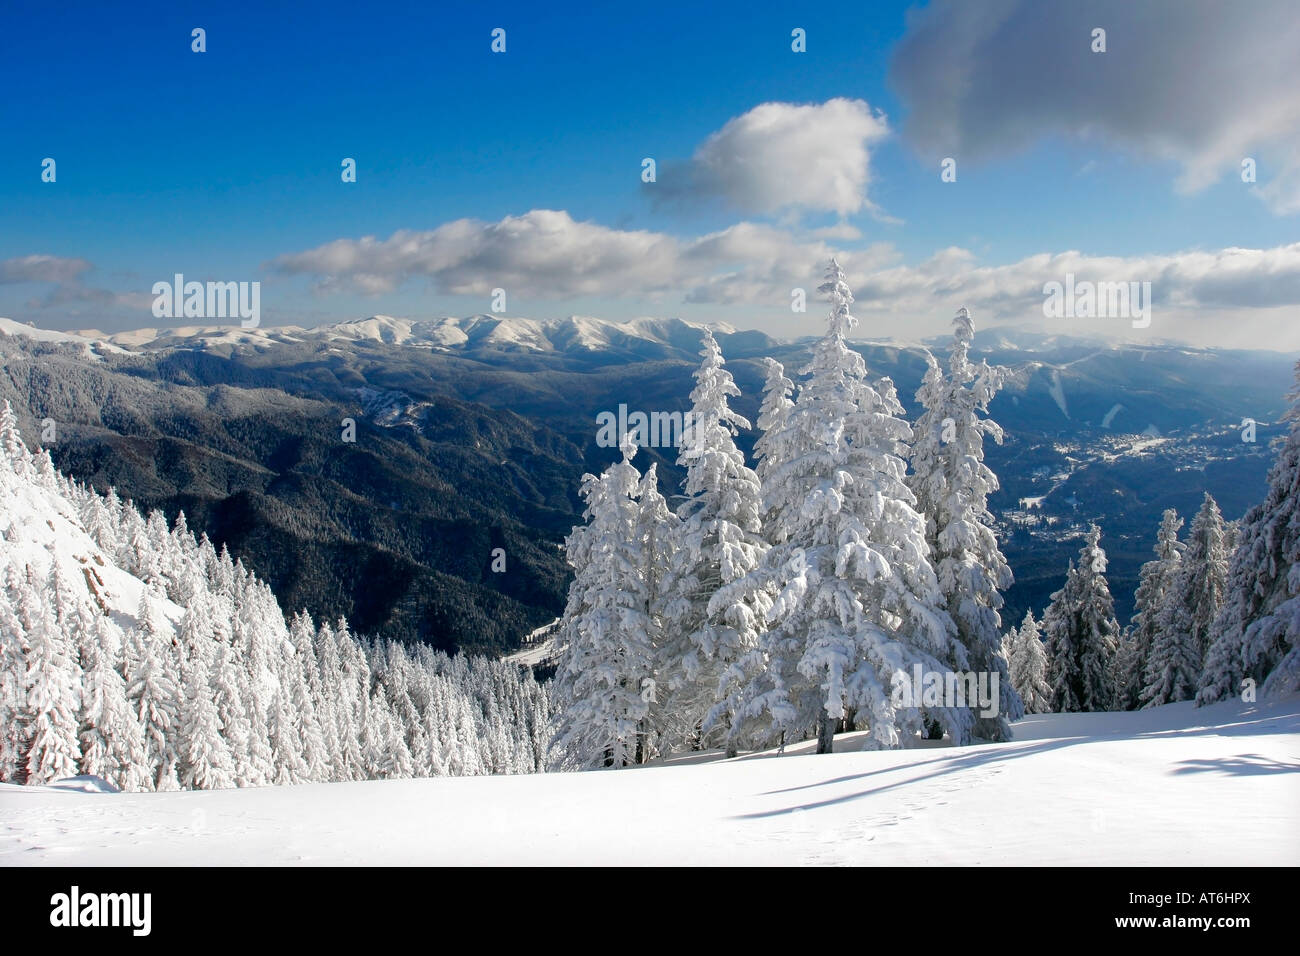 Winter landscape with pine trees covered by snow Stock Photo